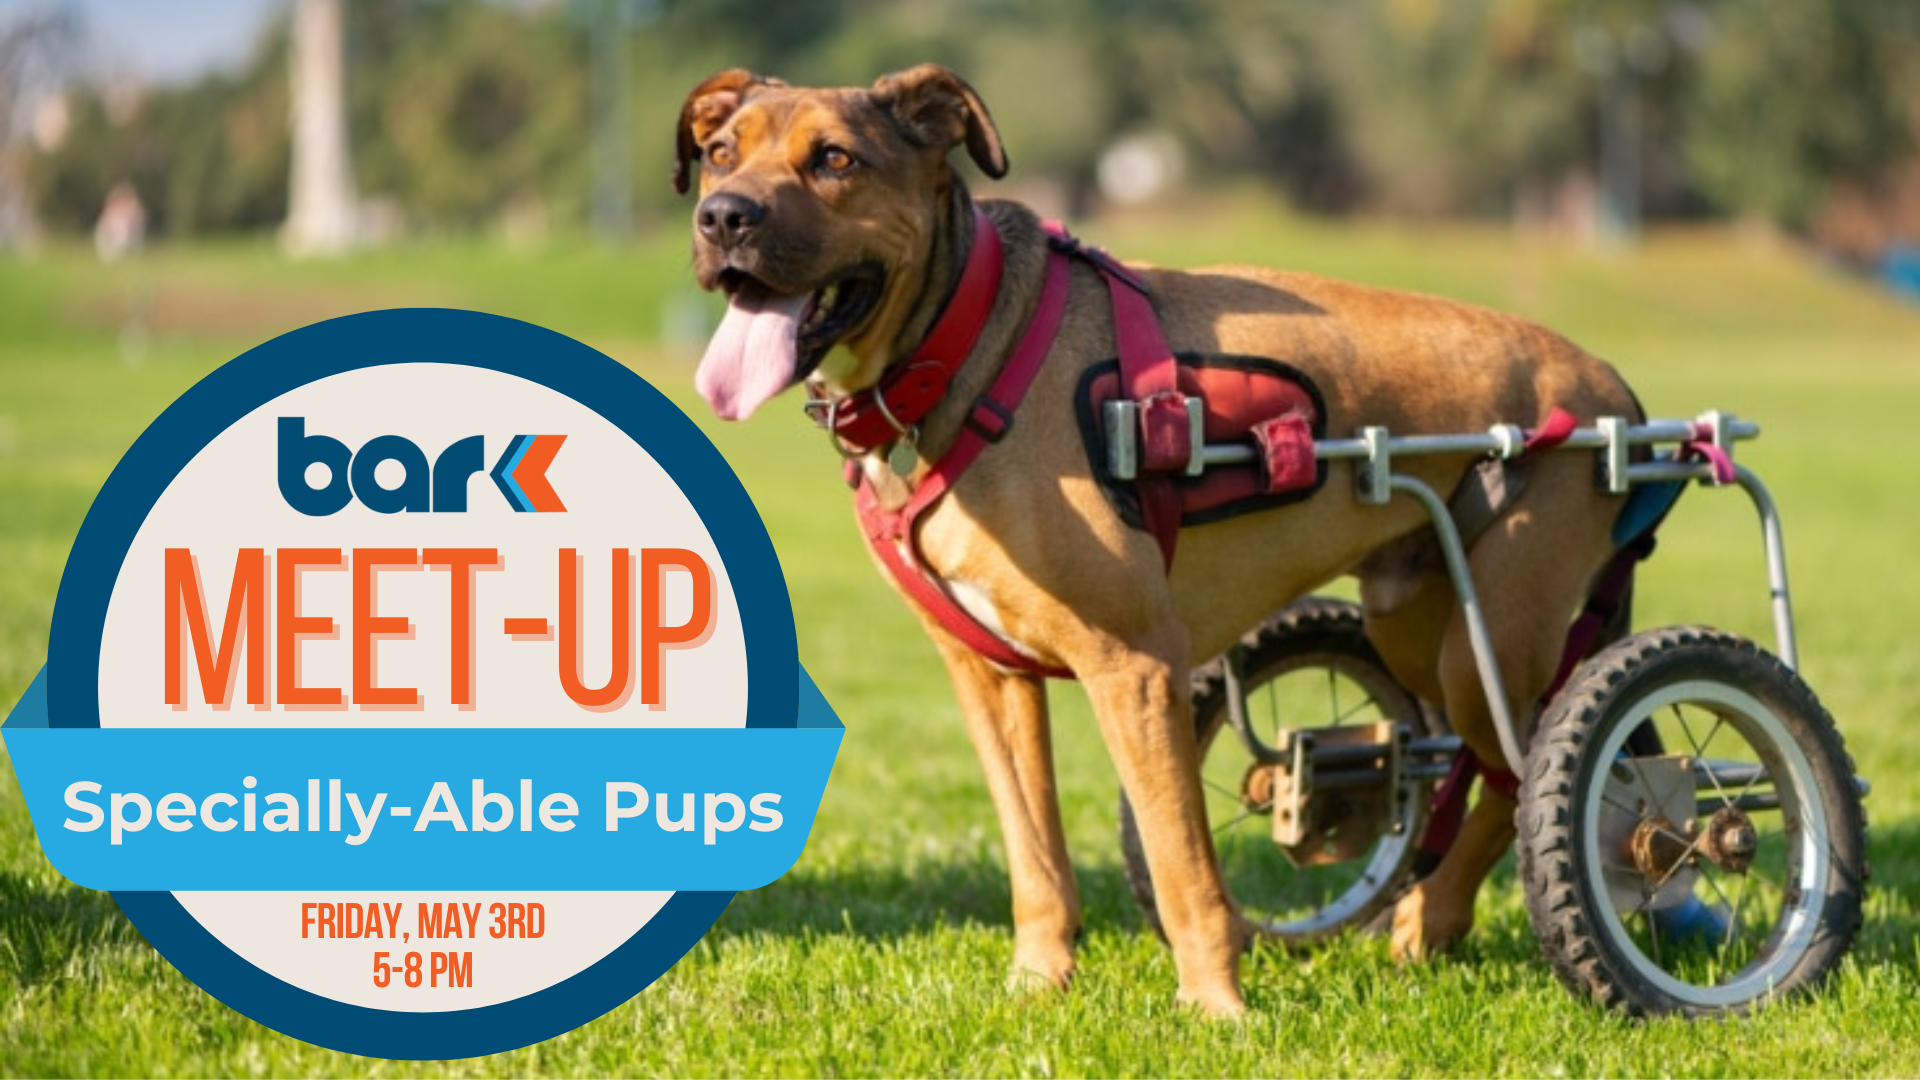 Bar K specially-able pups meet-up on Friday, May 3rd 5-8pm